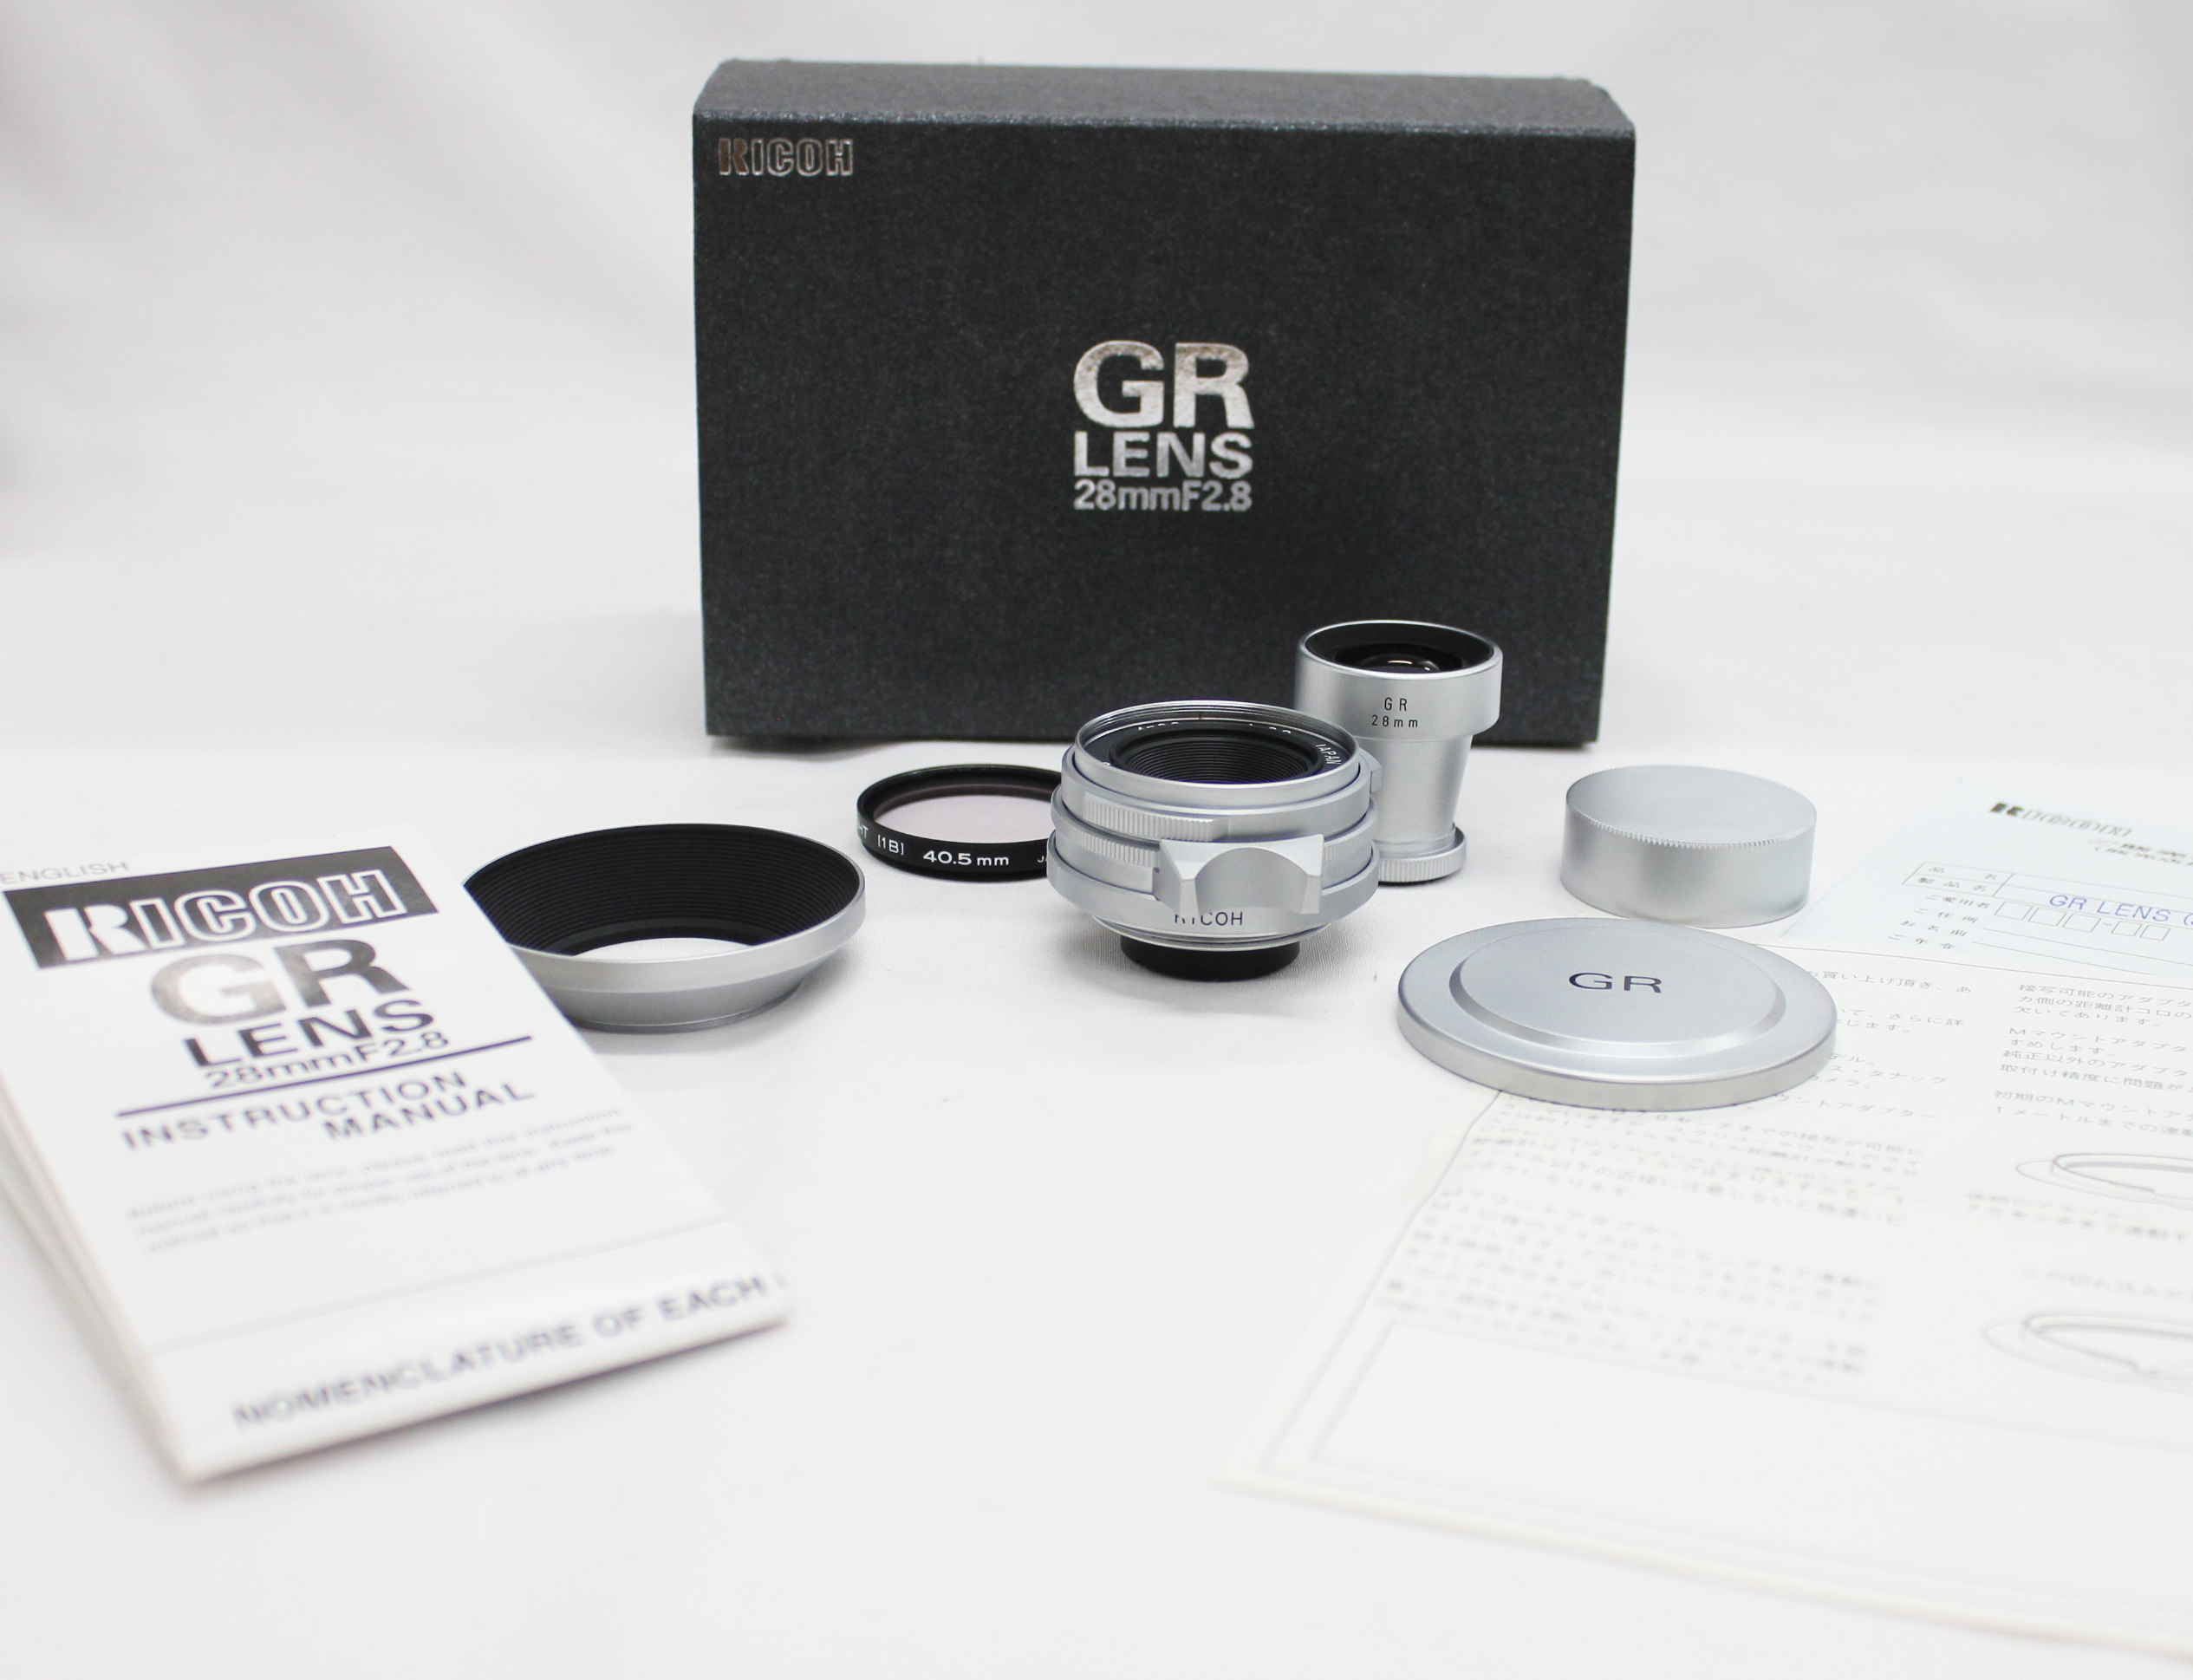 Japan Used Camera Shop | [Mint] Ricoh GR Lens 28mm F/2.8 for L39 LTM Leica Screw Mount with 28mm Finder in Box from Japan